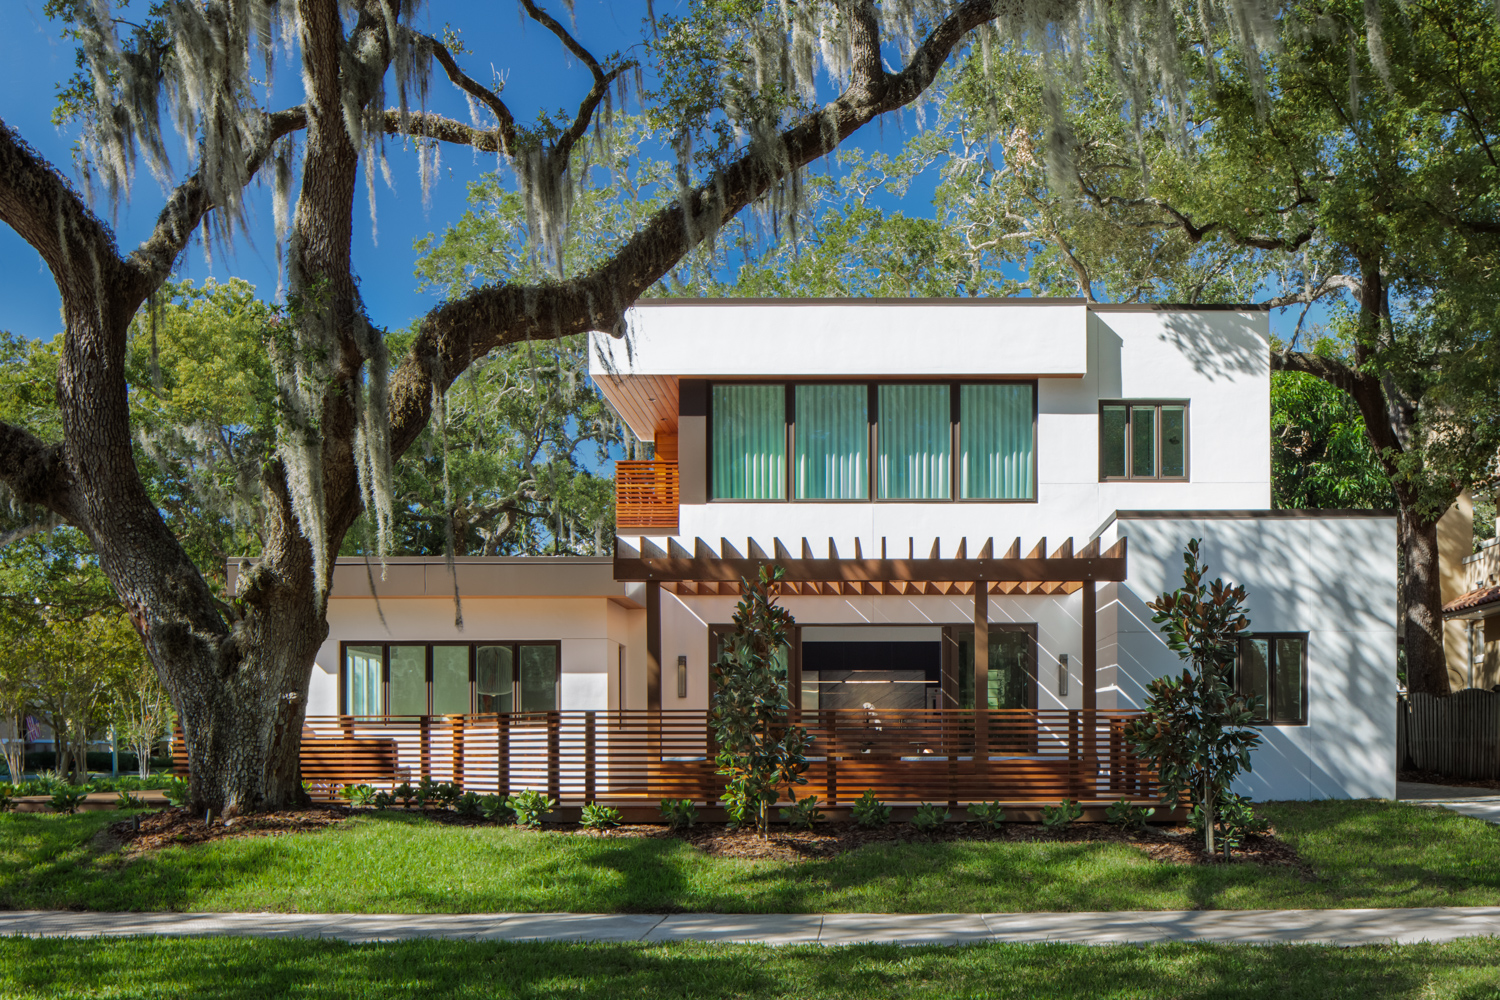 Hyde Park House - modern home in Hyde Park, Tampa, FL